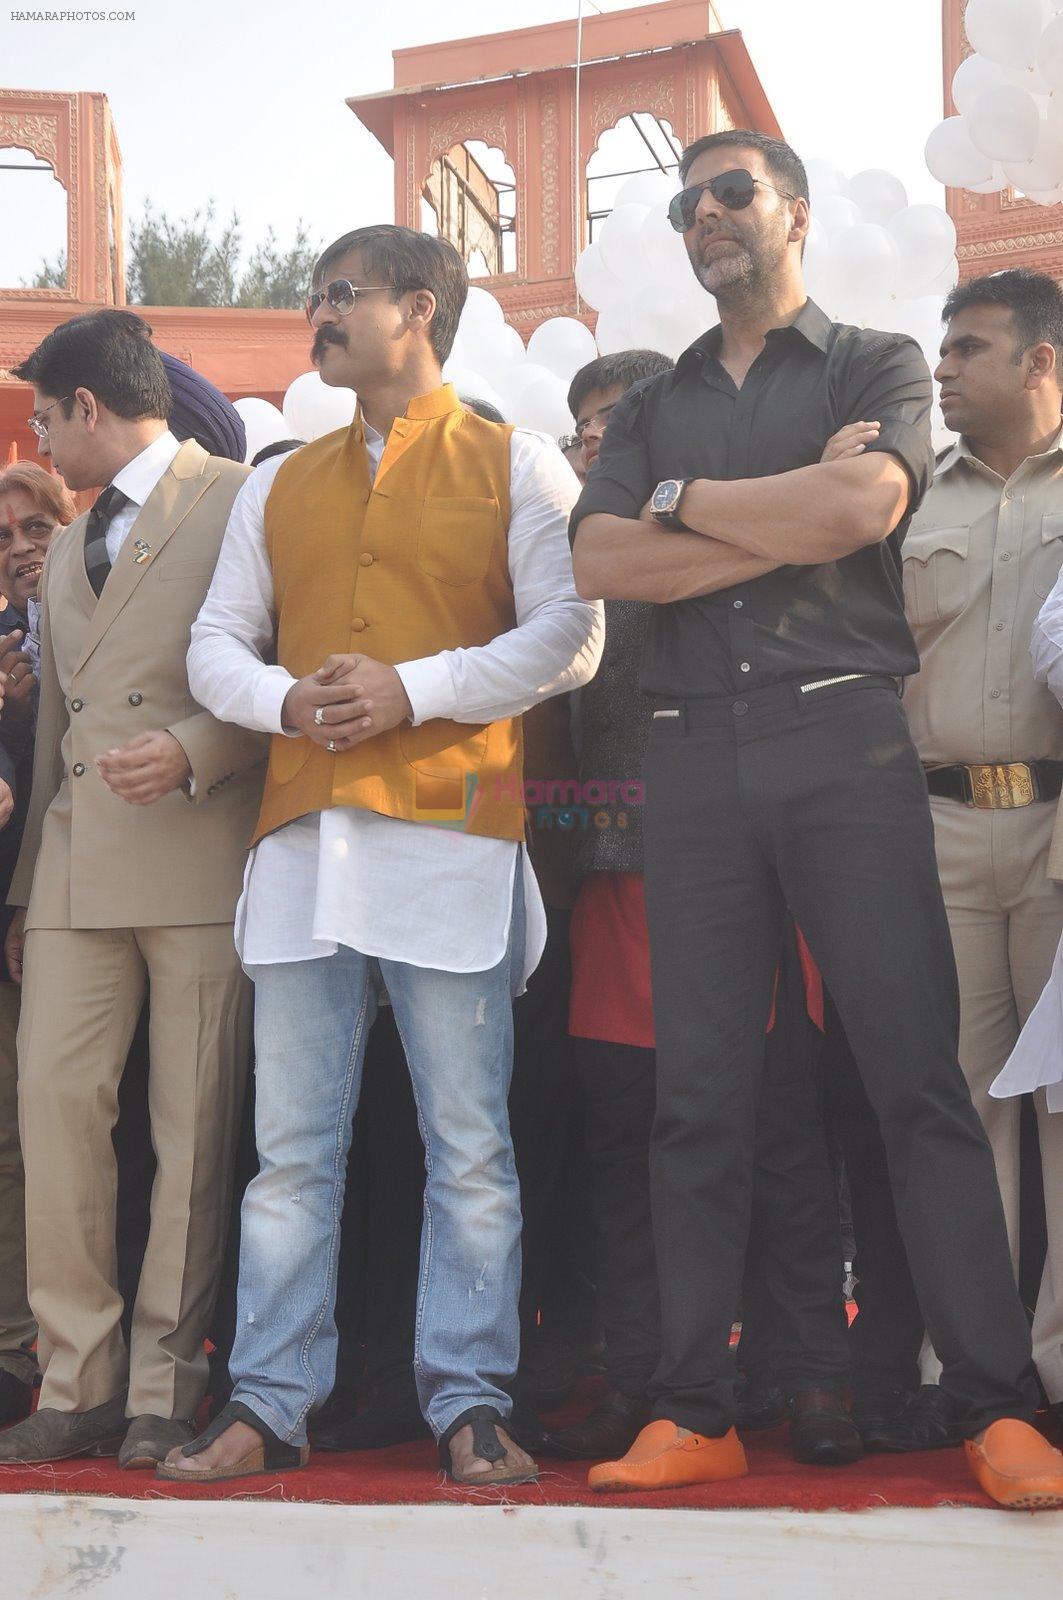 Akshay Kumar and Vivek Oberoi at 2611 honour event in Marine Lines on 23rd nov 2014